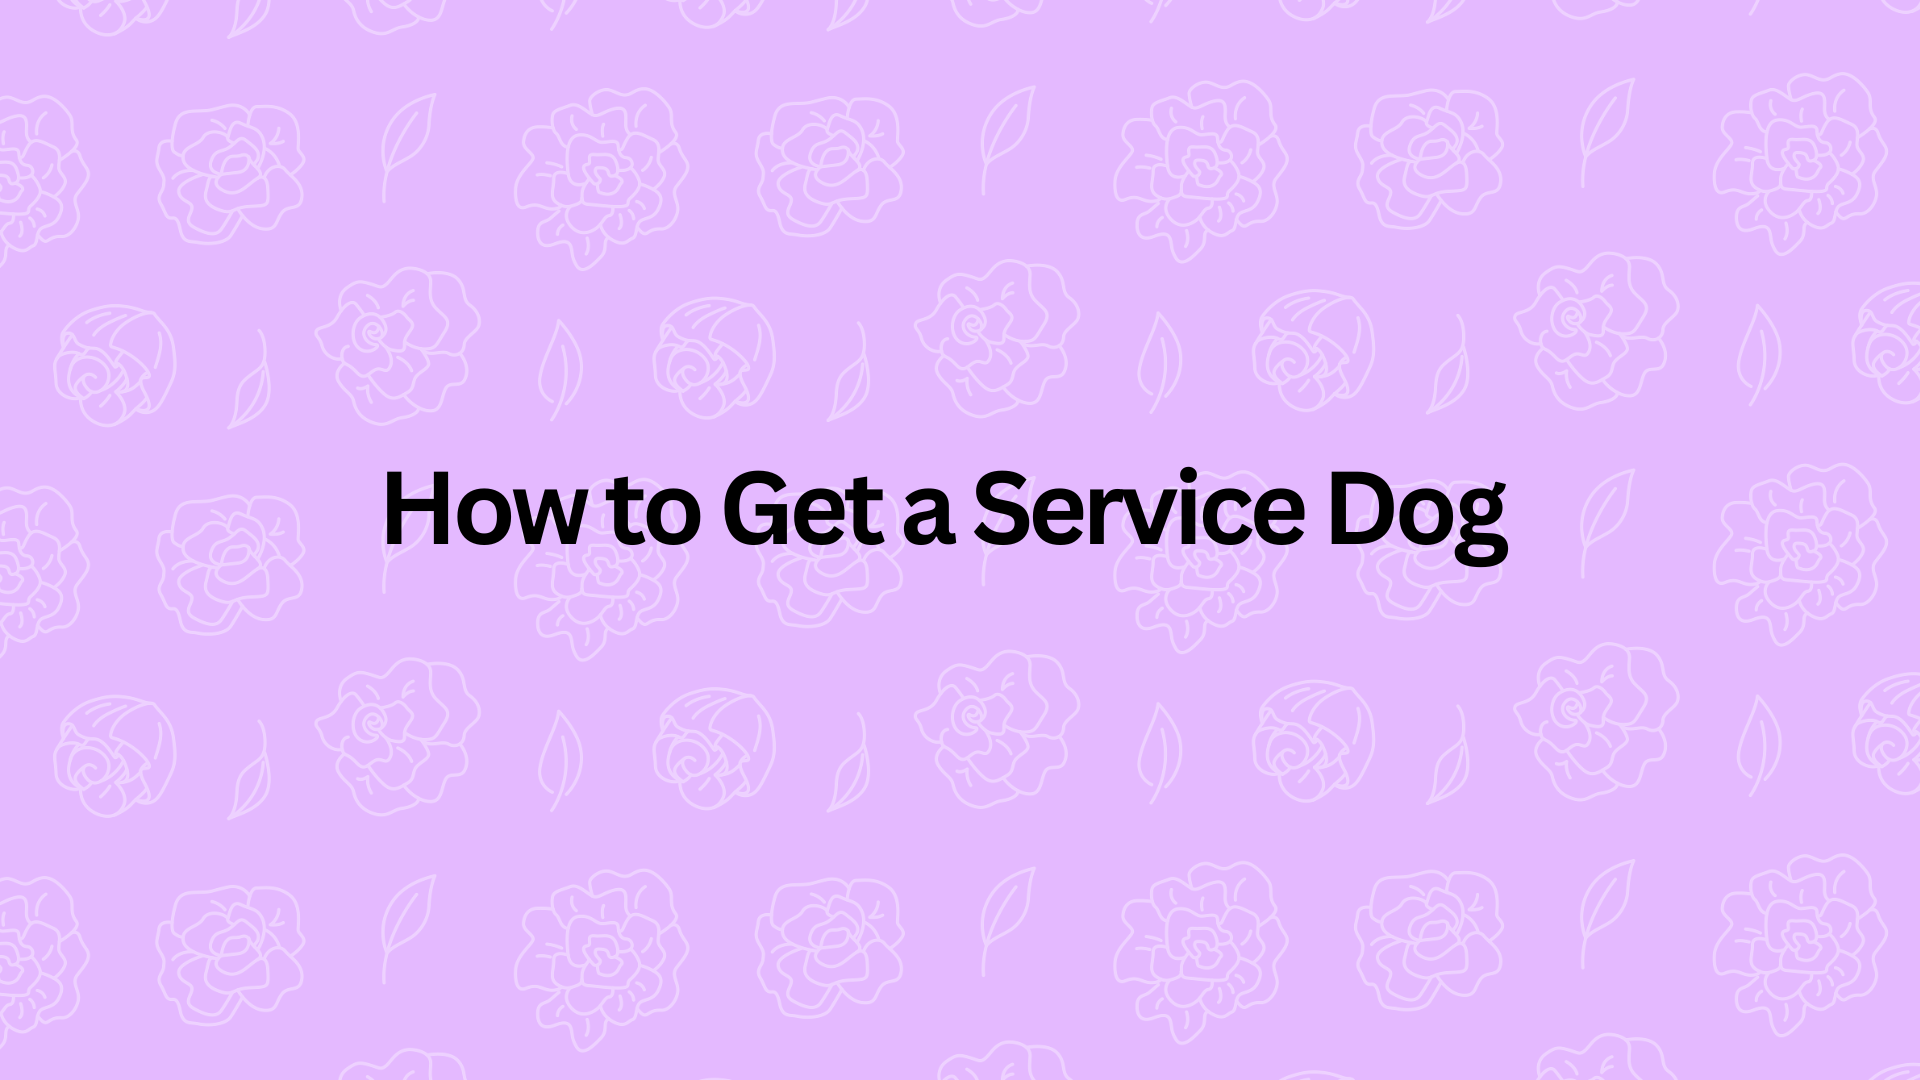 How to Get a Service Dog